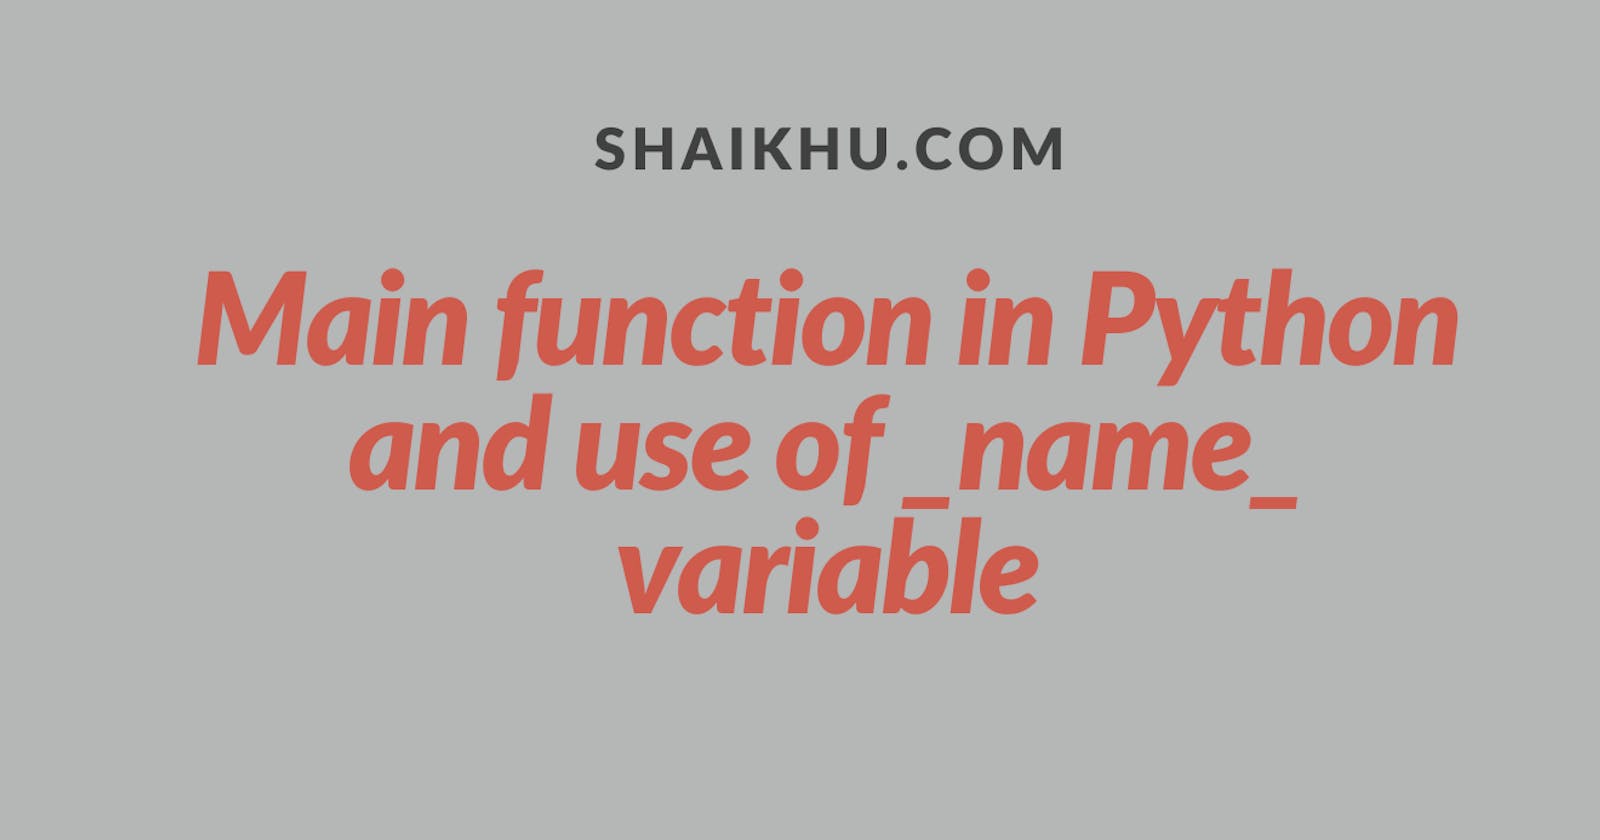 Main function in Python and how to use __name__ variable?